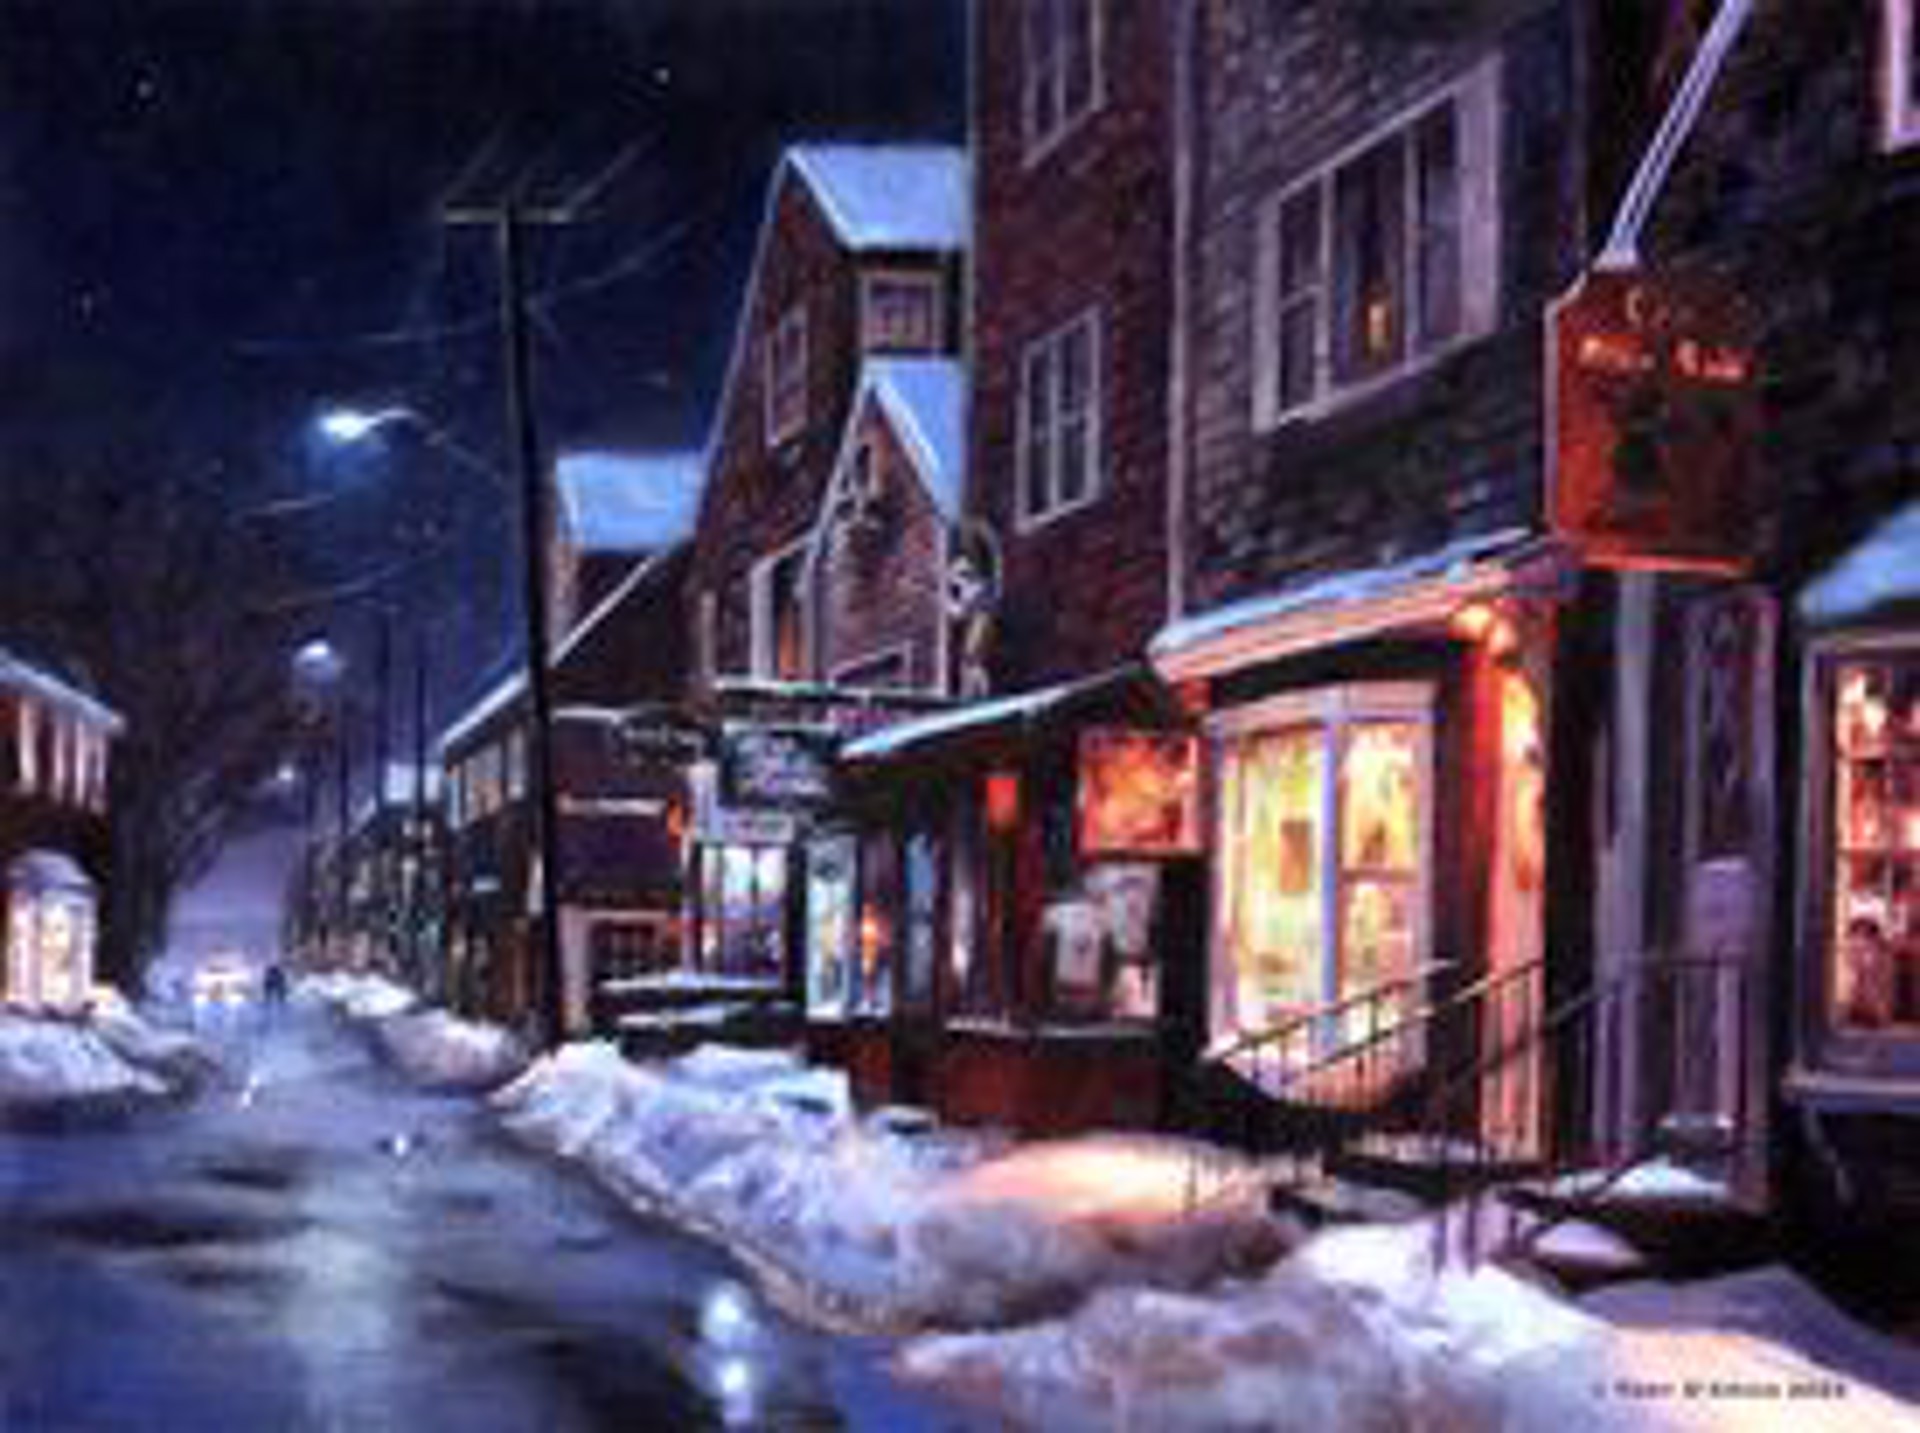 Winter Night in Rockport by Tony D'Amico